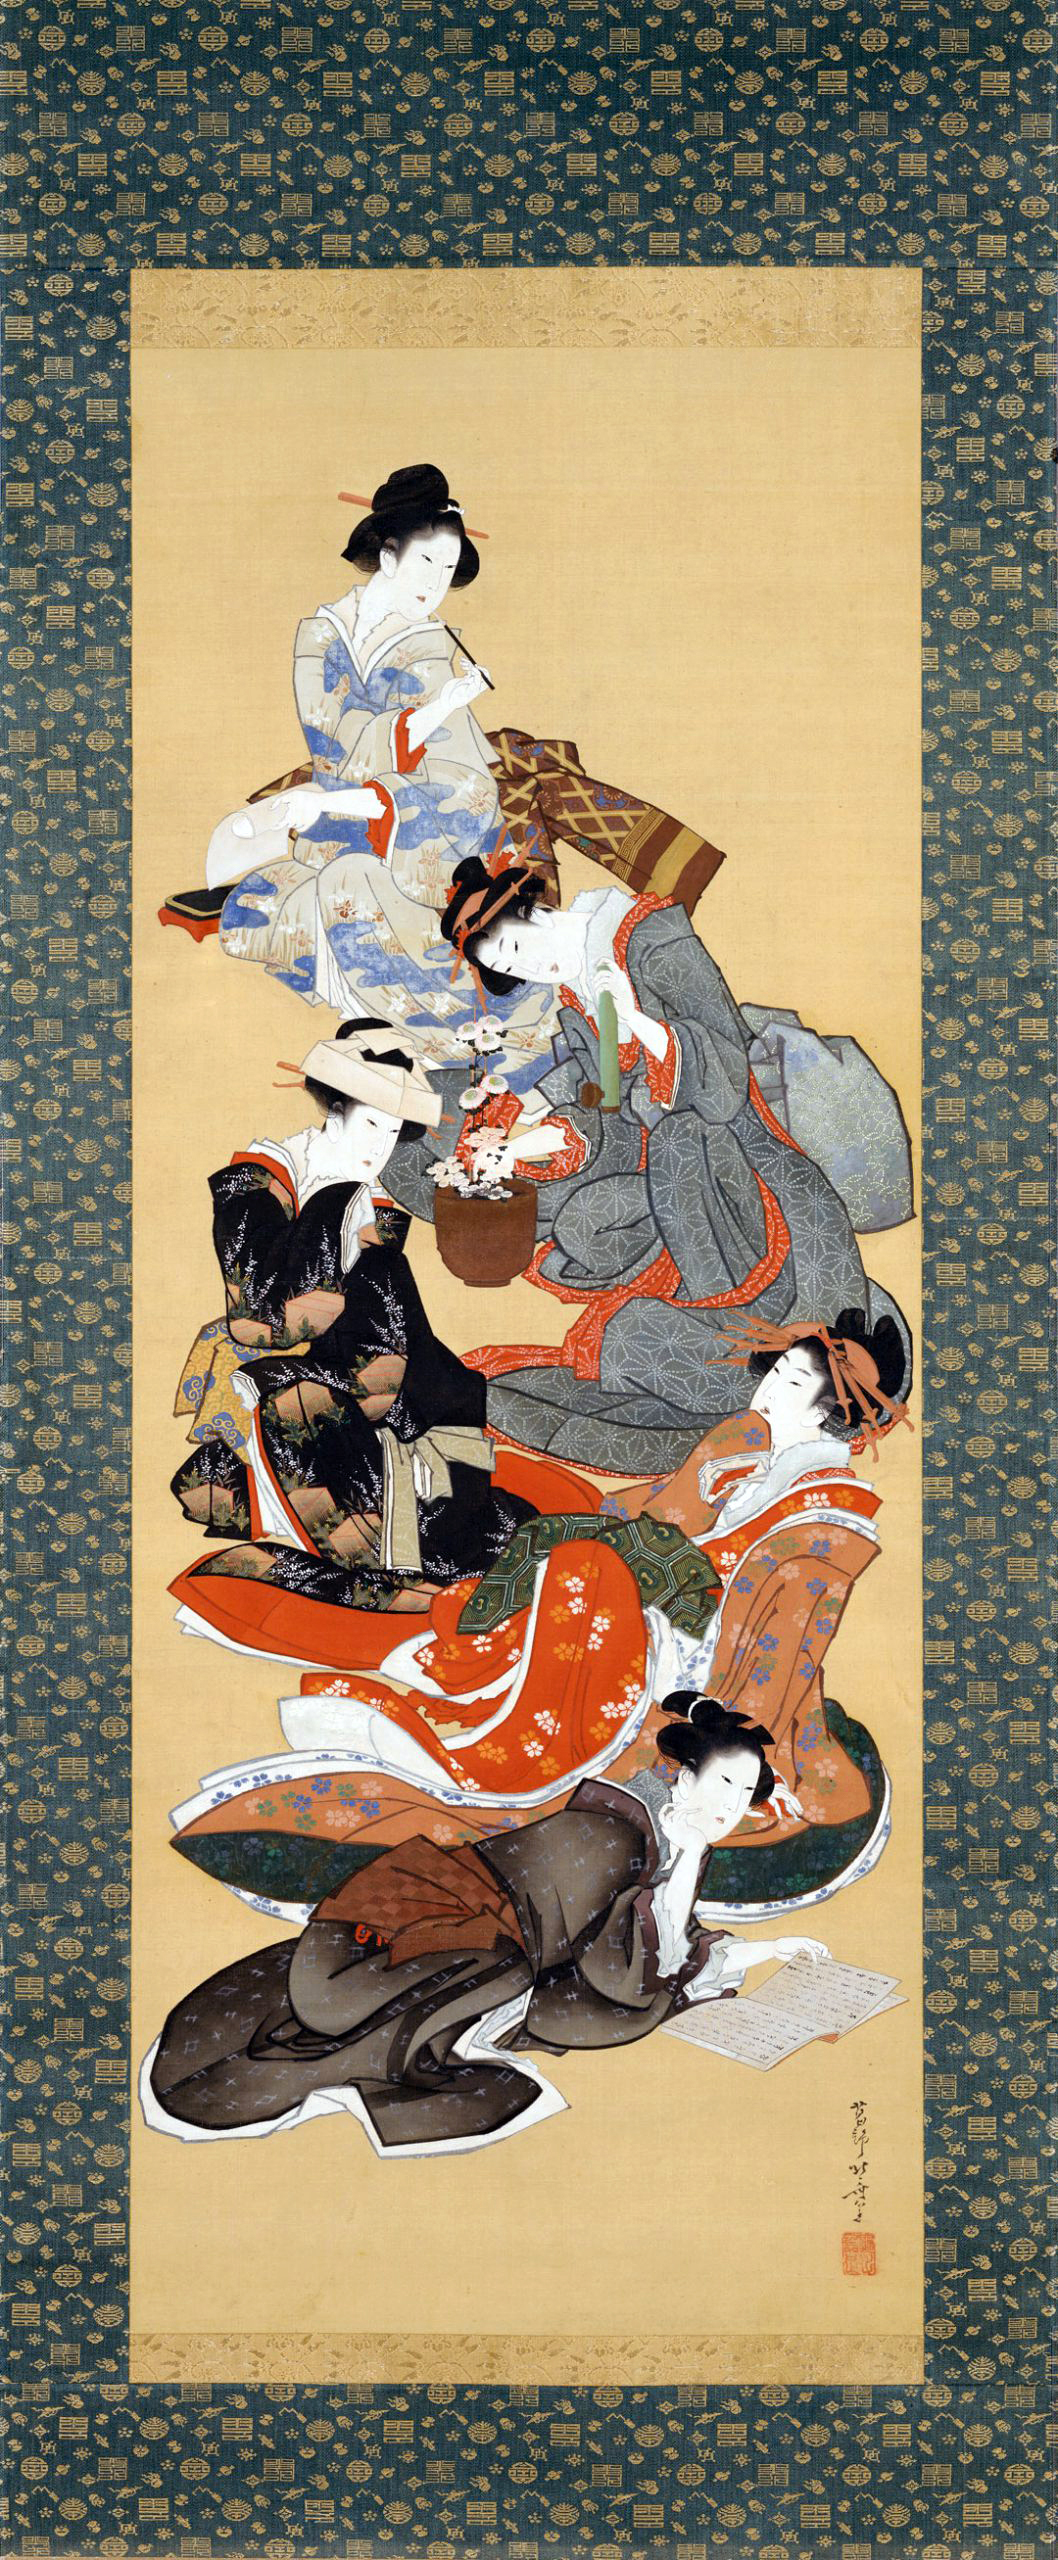 Katsushika Hokusai, Five Beautiful Women, 1804-18, ink and color on silk, 34 x 13-1/2 inches (image), 71 x 18-1/4 inches (scroll) (Seattle Art Museum)